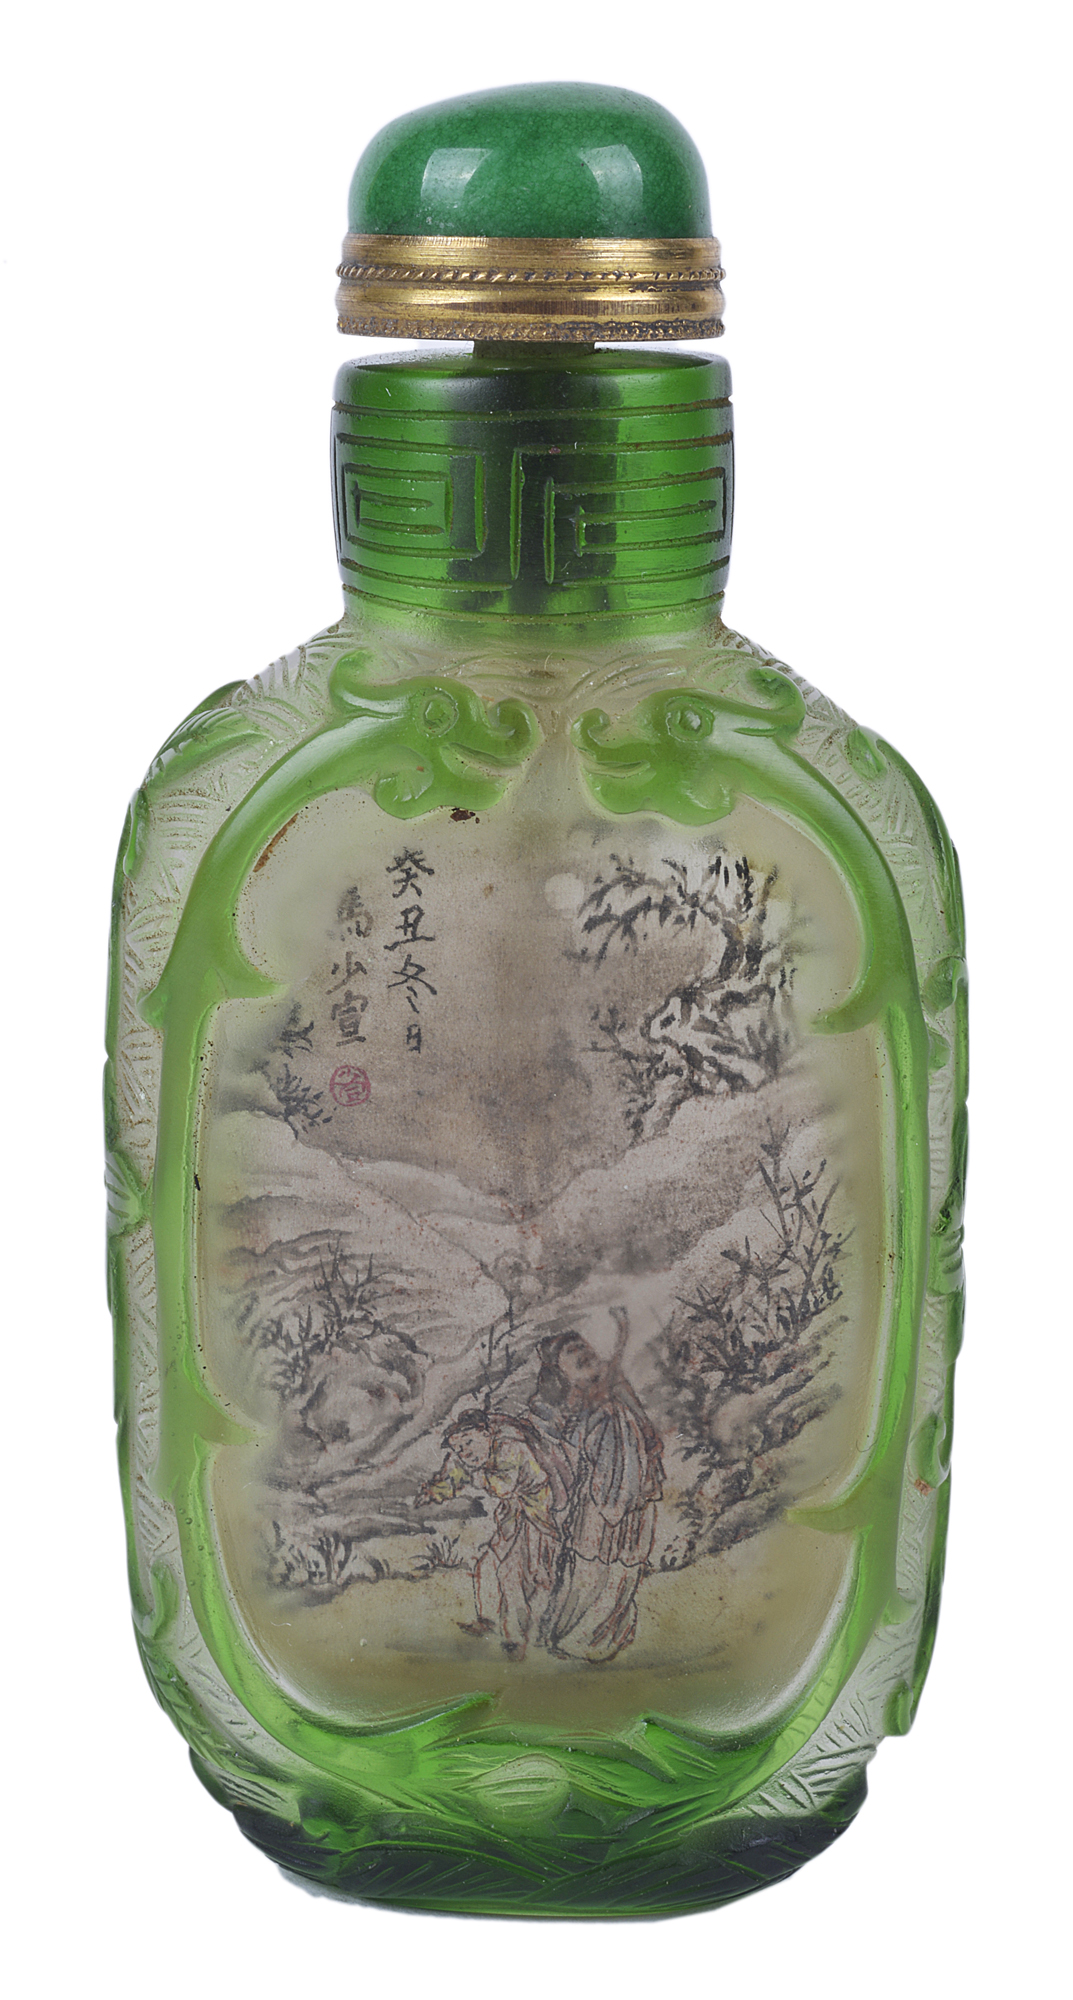 A 19th Century Chinese Peking glass snuff bottle and stopper, the green outer glass carved to reveal